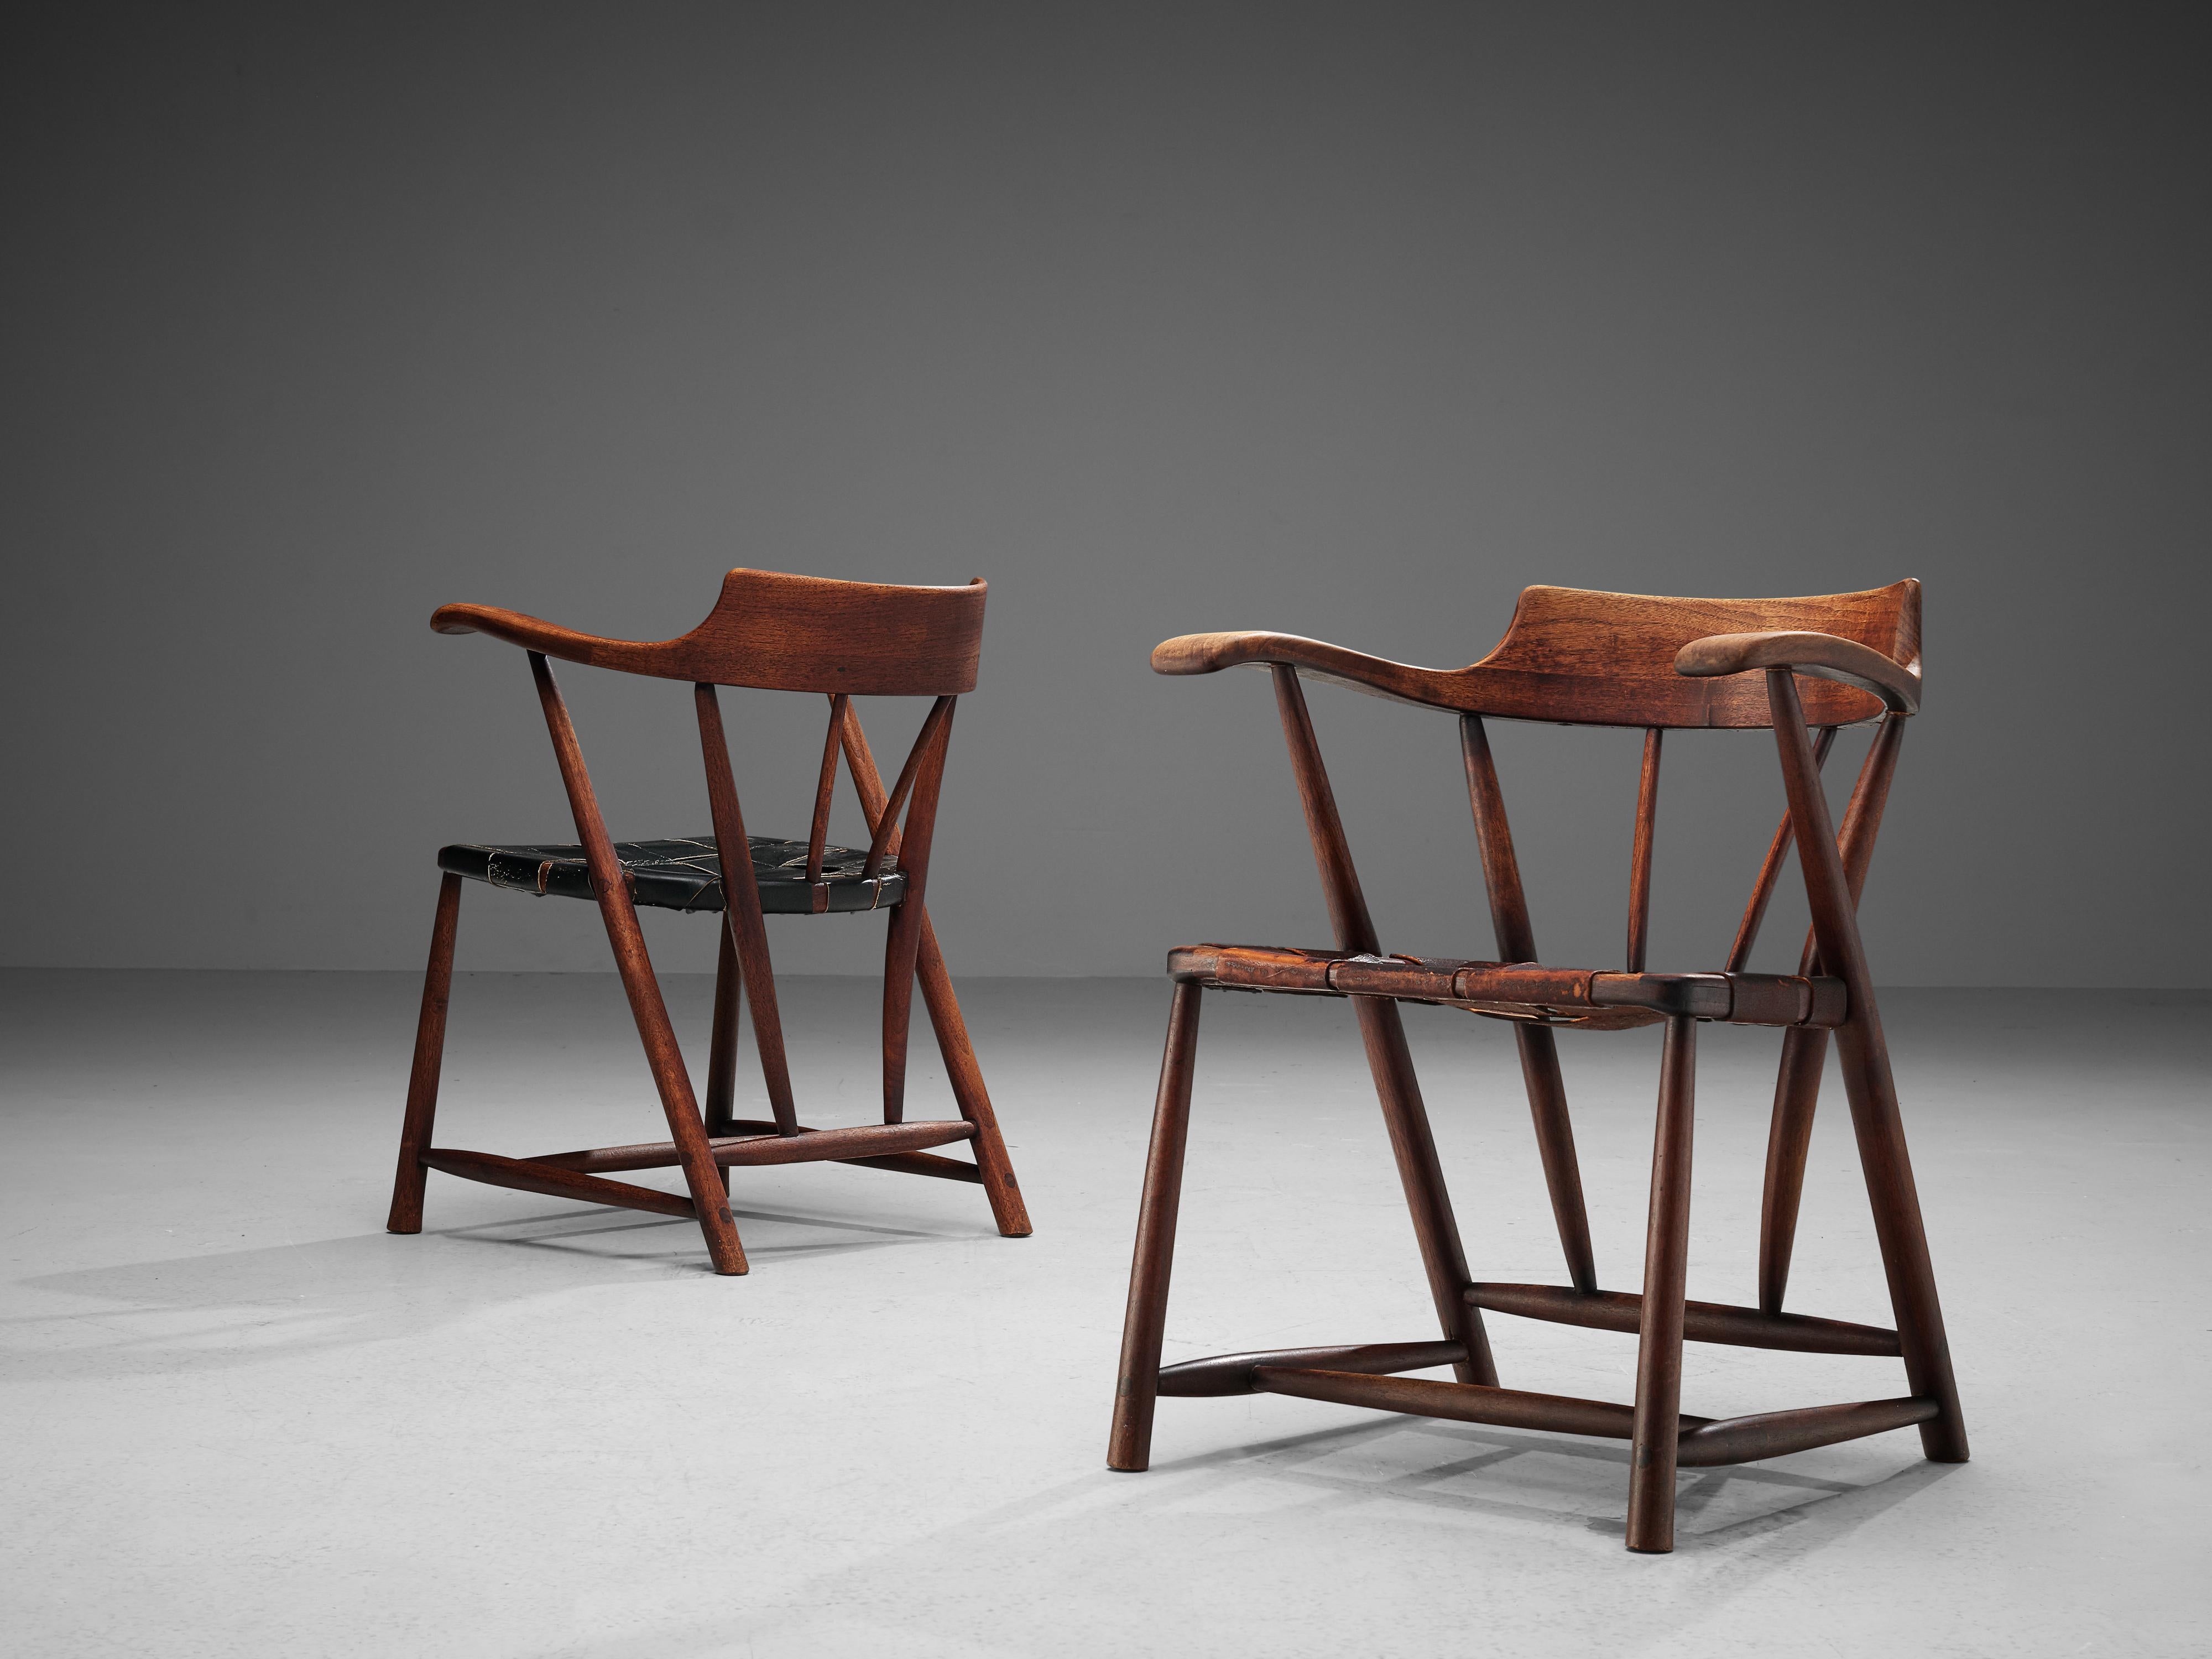 Wharton Esherick, ‘Captain’s Chairs’, American walnut, black/ brown leather, United States, 1951

This beautiful set of ‘Captain’s Chairs’ is a striking example of American designer Wharton Esherick’s oeuvre. The chairs both are one of the first